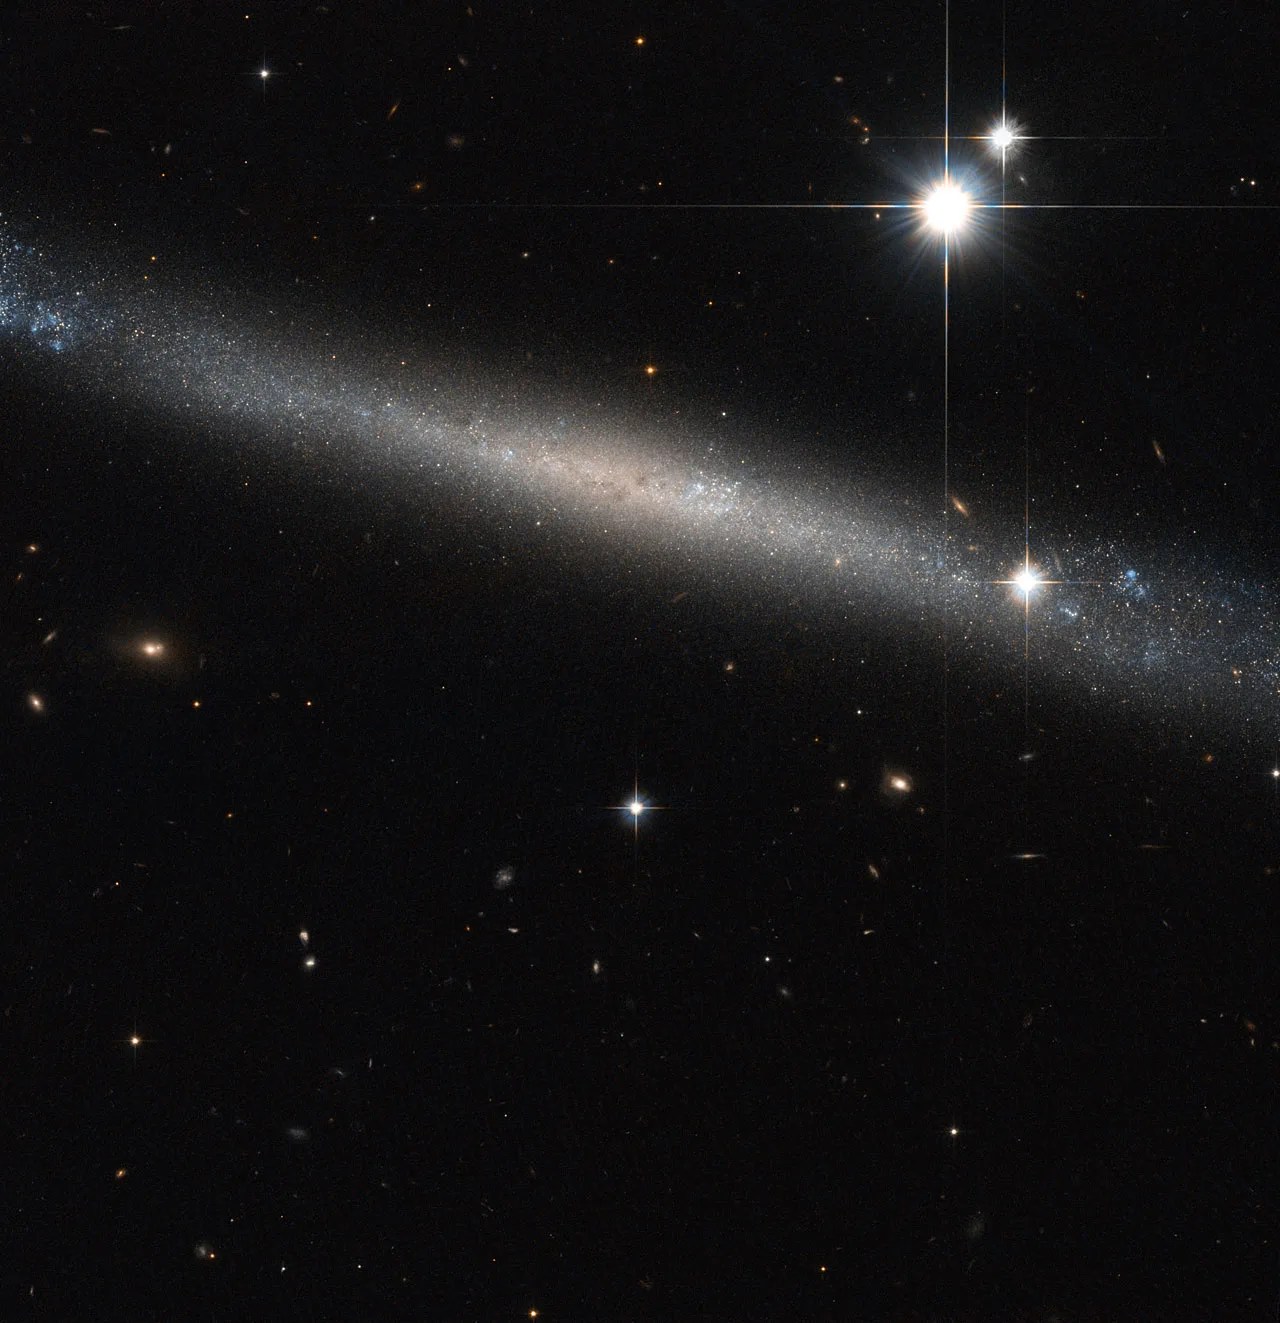 a thin sliver of a galaxy seen edge on - one of the flattest Hubble has imaged - with two bright stars burning upper right